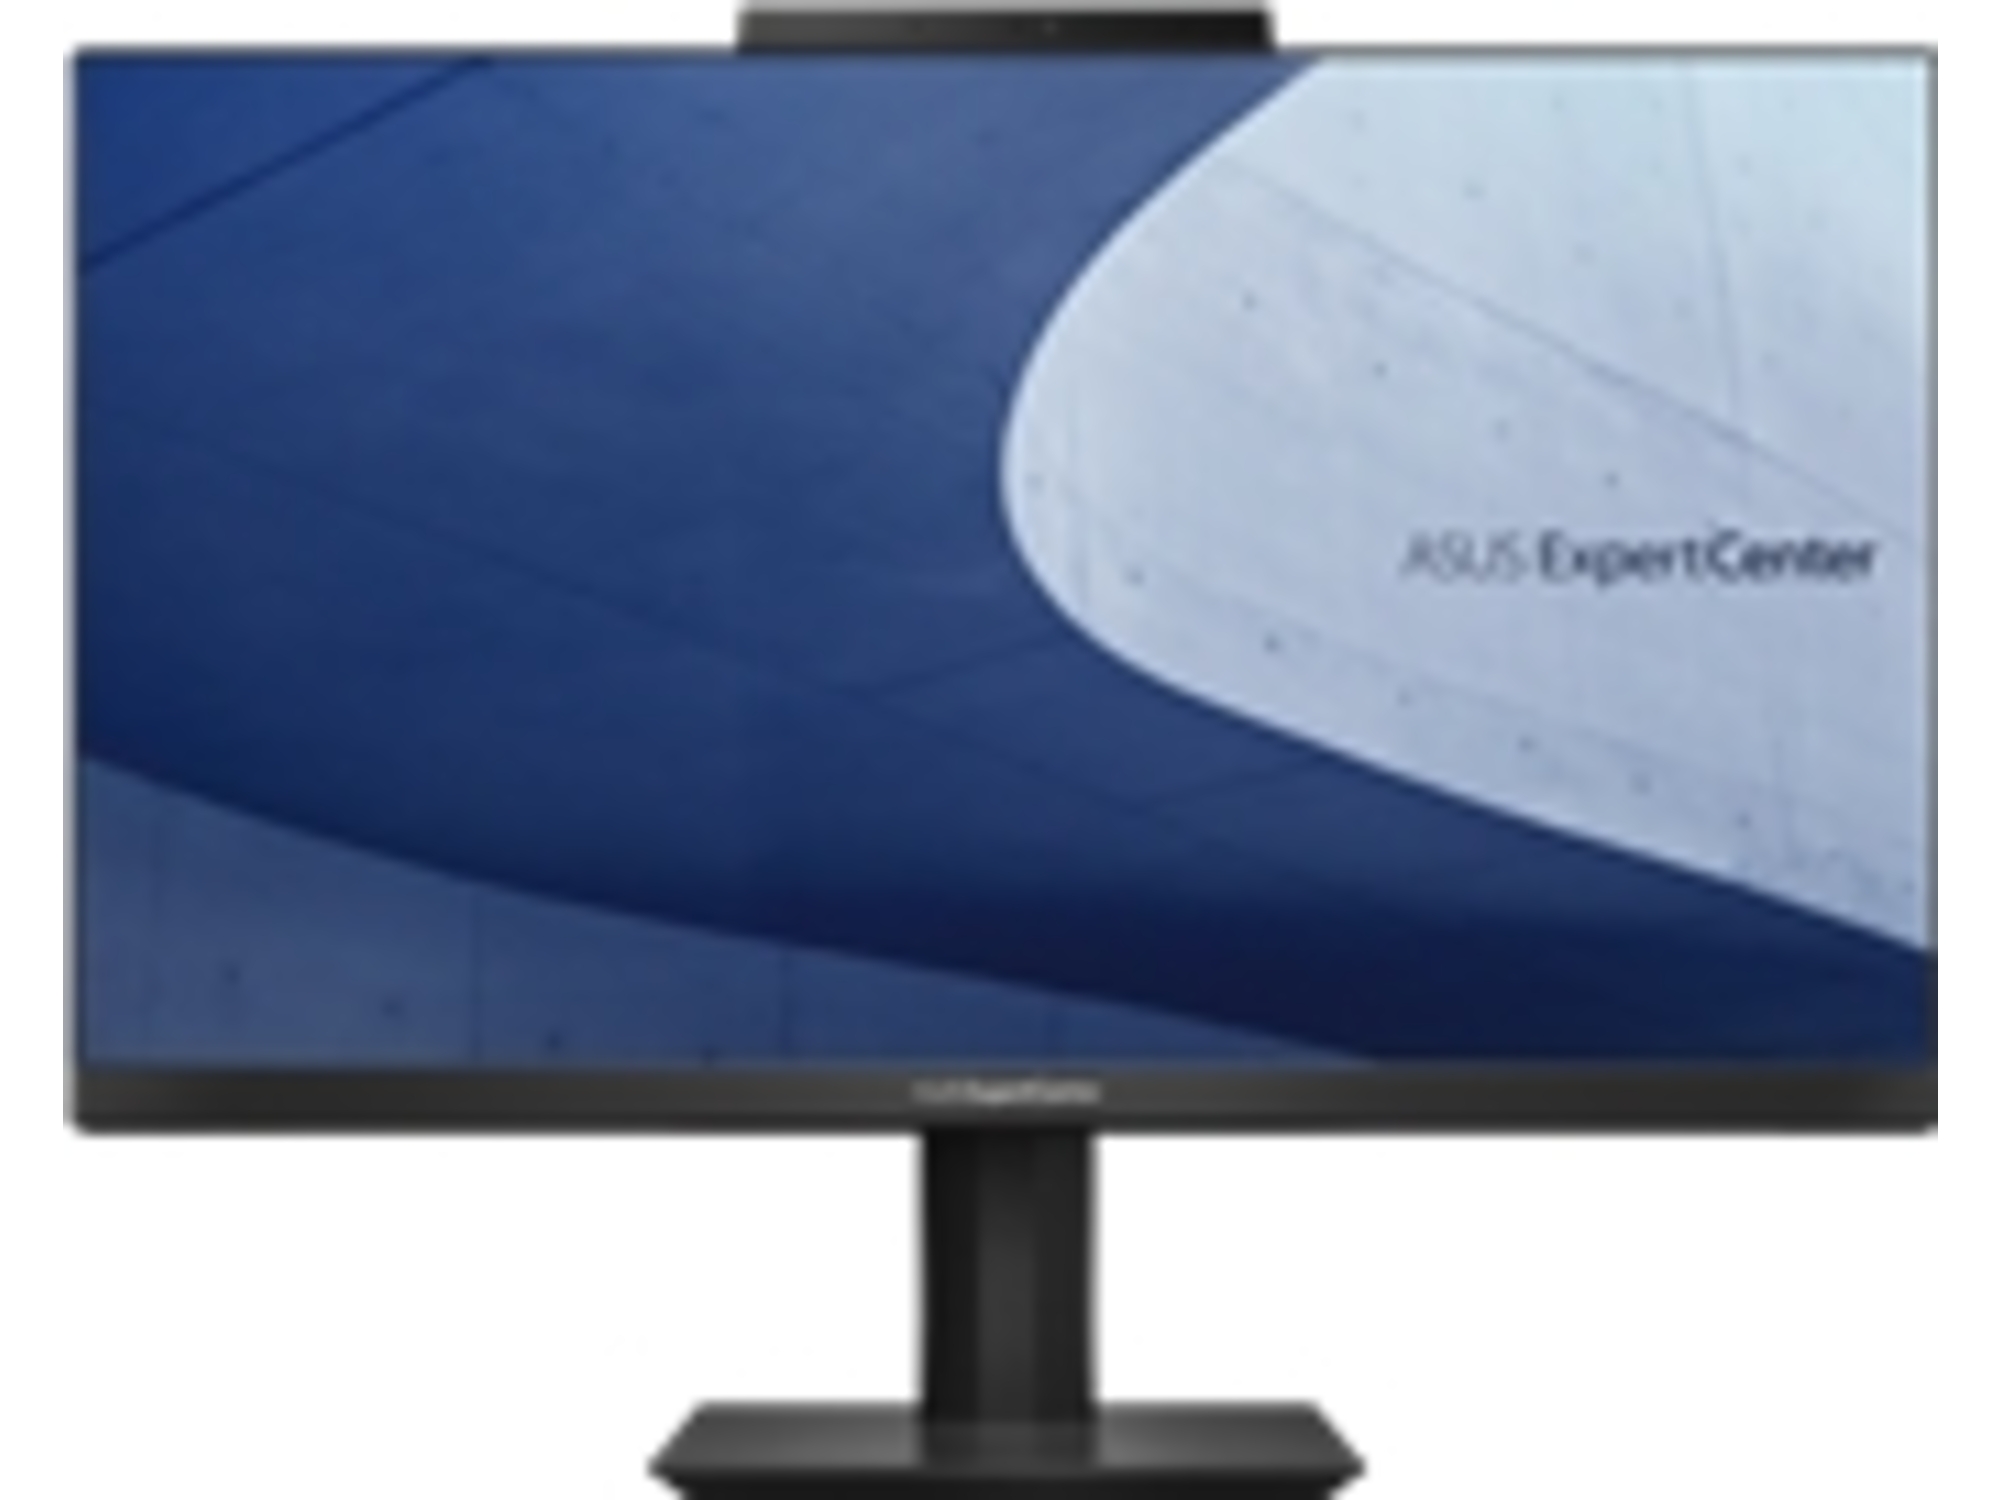 ASUS ExpertCenter E5 AiO 24 E5402WHAK DUO236R/all-in-one/Core i7 11700B 3,2 GHz/16 GB/SSD 512 GB, HDD 1 TB/LED 23,8 90PT0371-M00SZ0